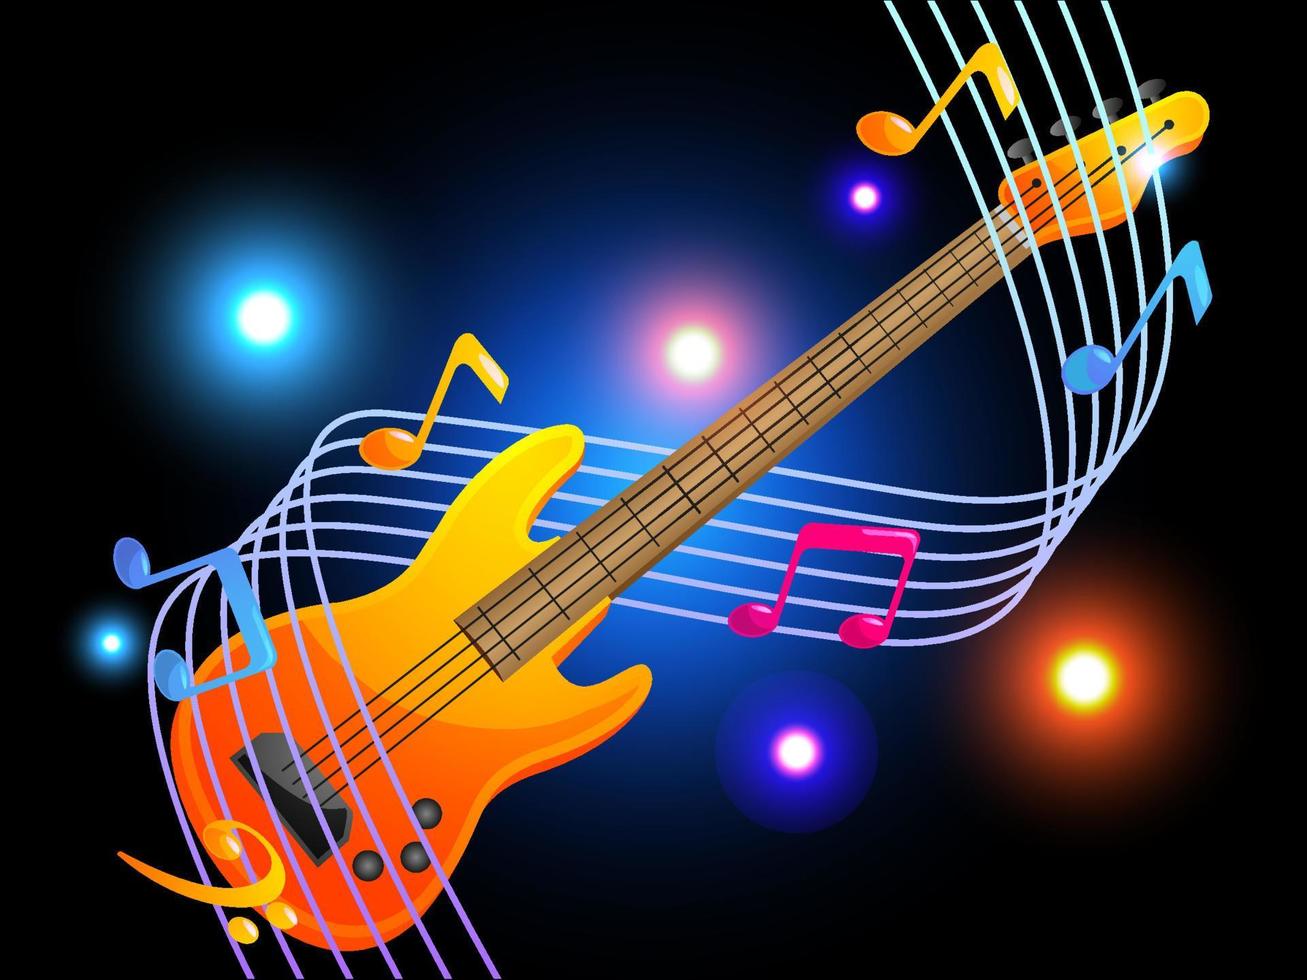 Bass guitar with elegant musical notes music vector